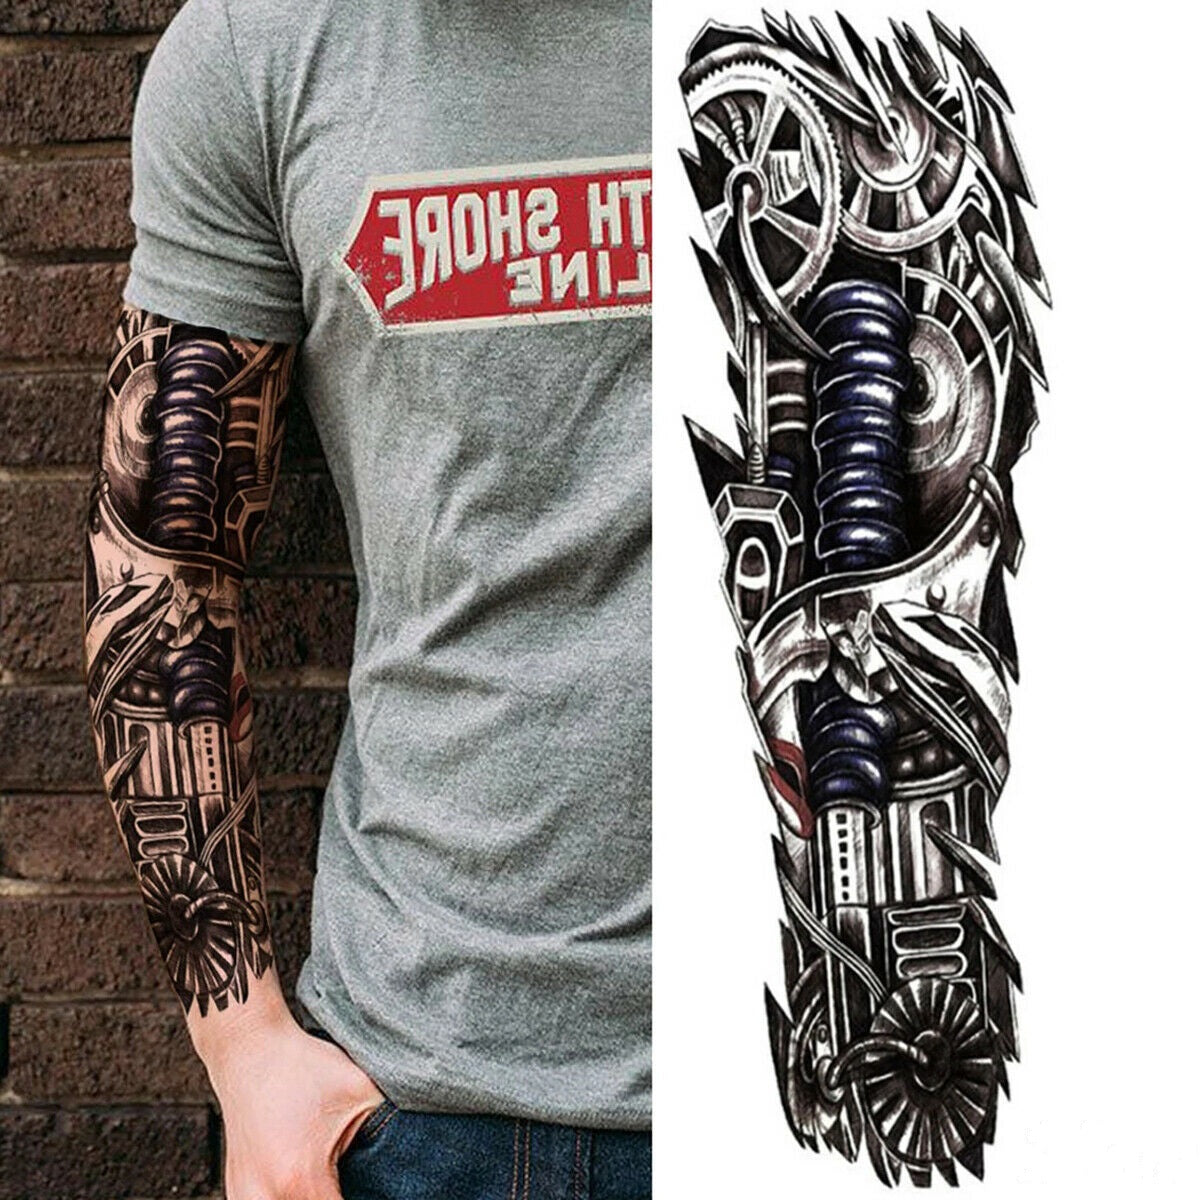 Full Arm Temporary Tattoo Art Sticker Waterproof Easy to apply Looks real